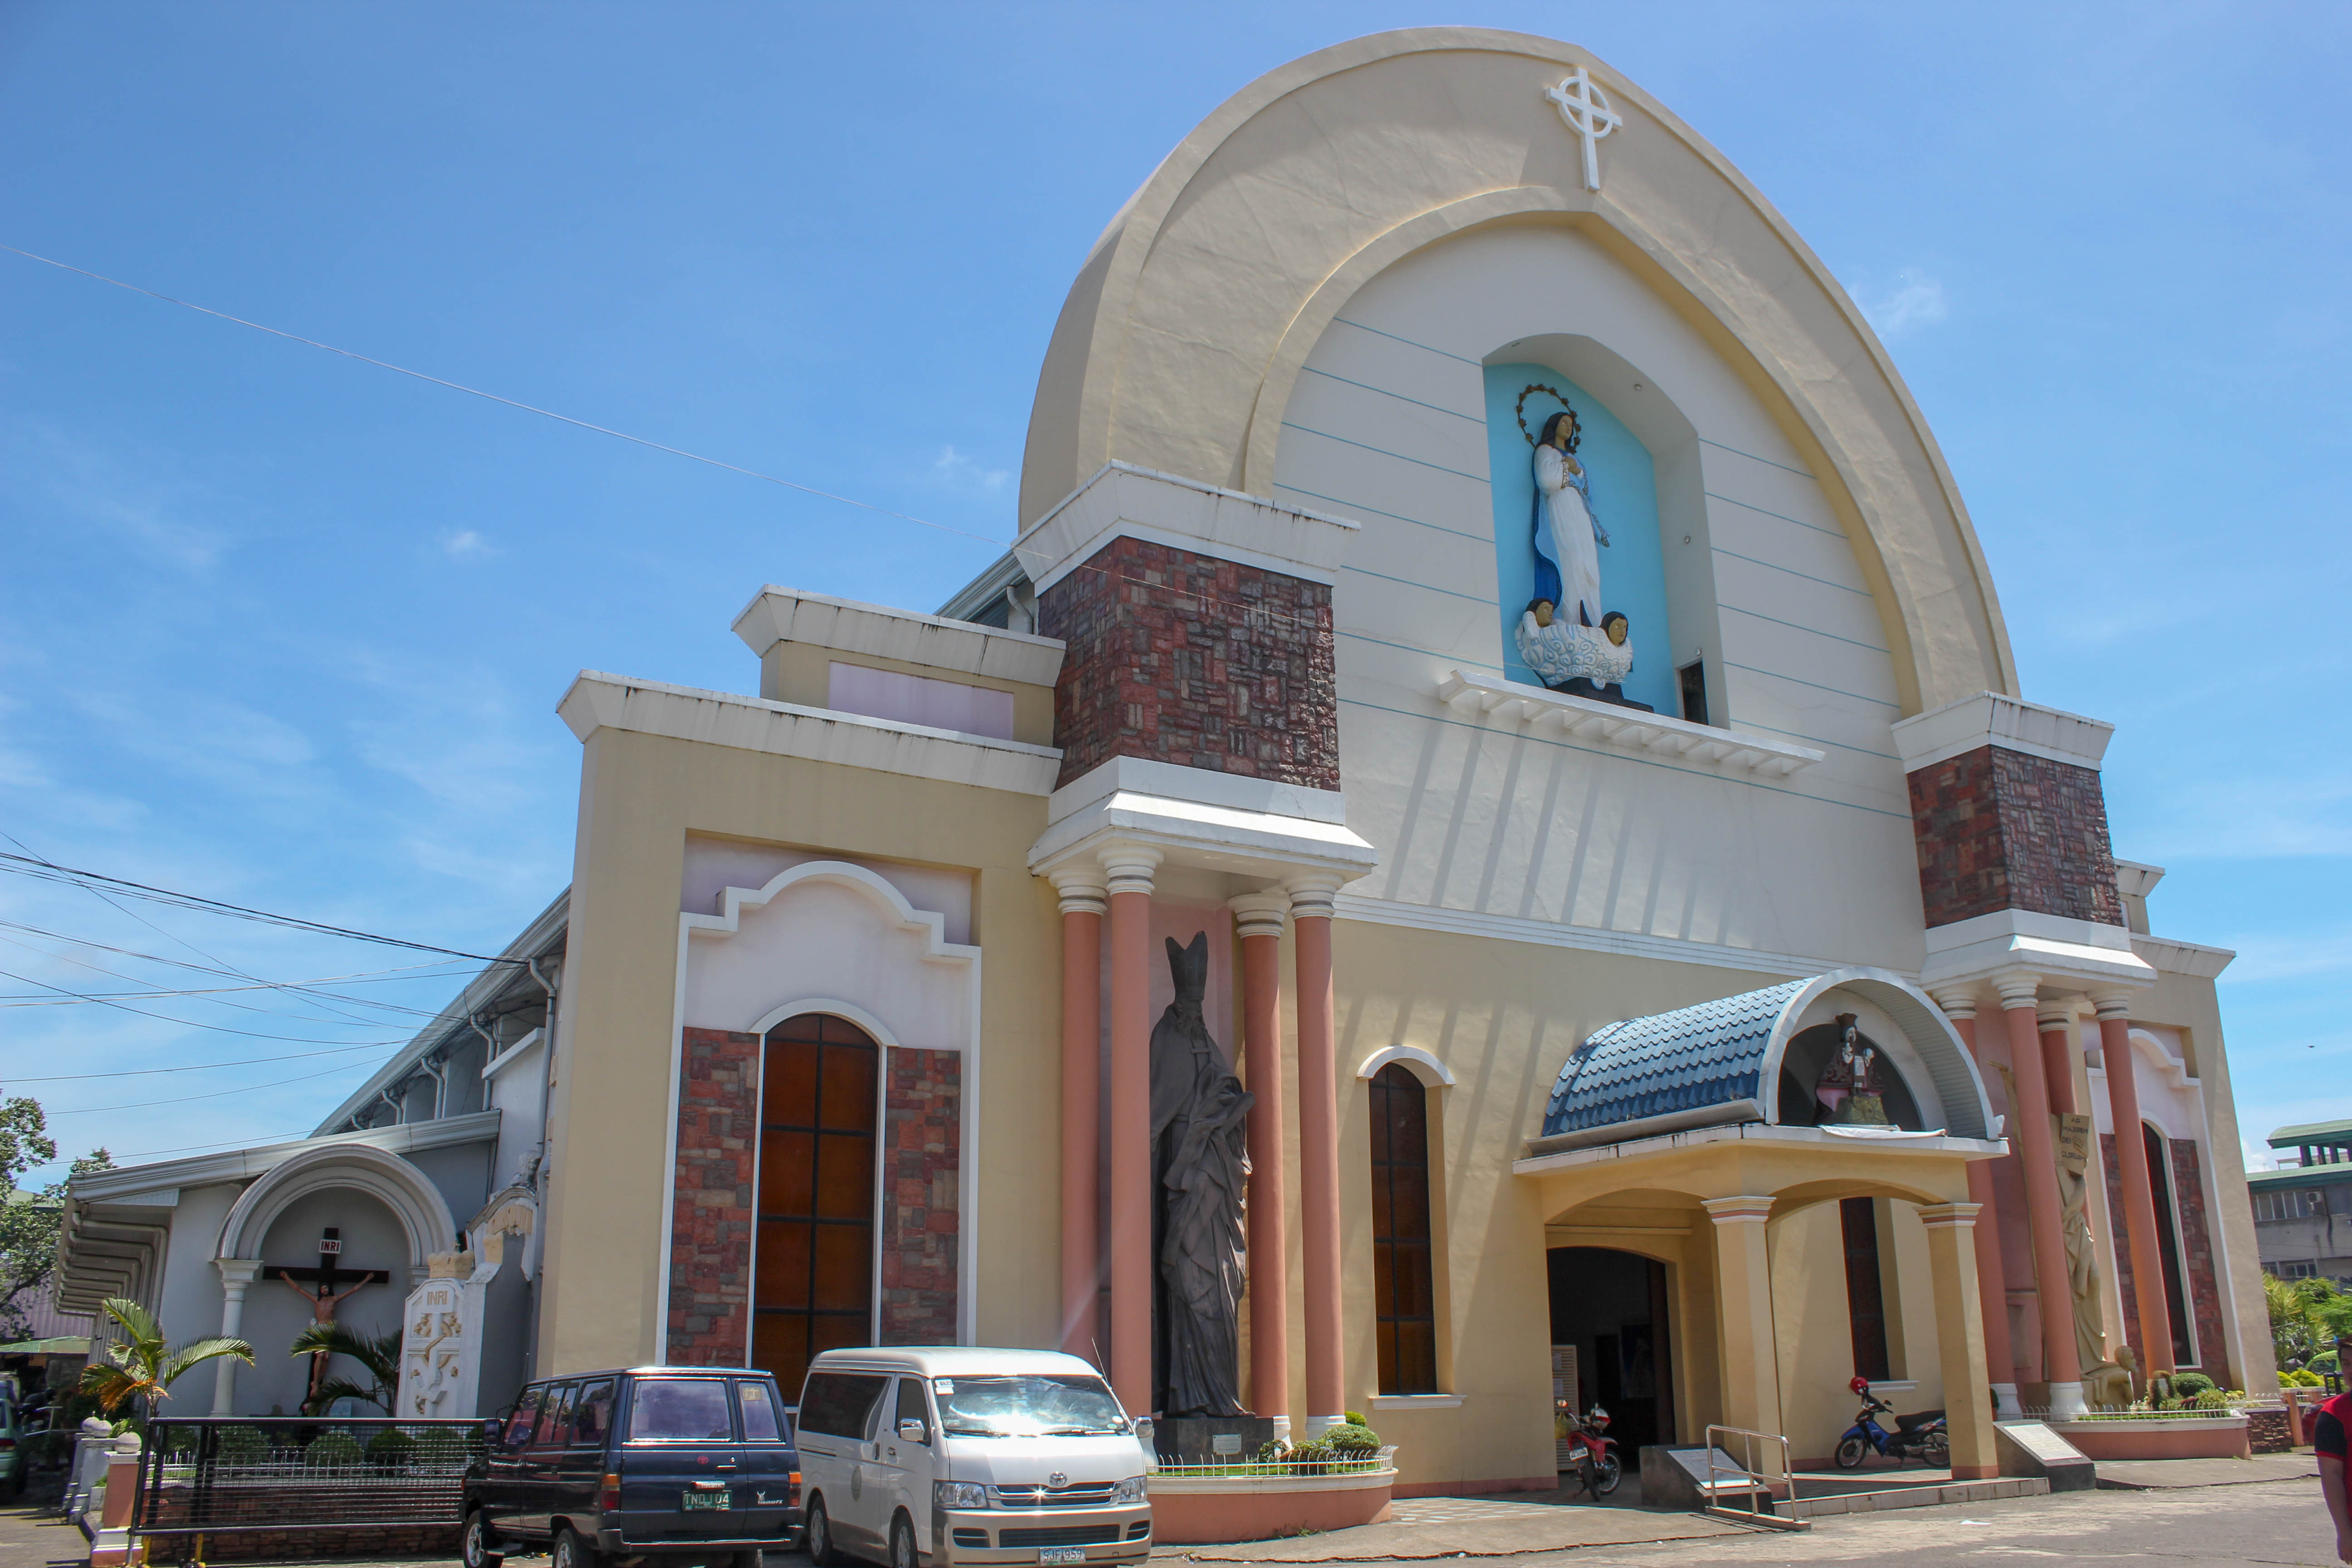 The Immaculate Conception Cathedral, completed in 1960, was originally designed by Filipino architect Leandro Locsin and renovated in 1997. It houses the Philippine's second biggest pipe organ and the biggest in Mindanao.